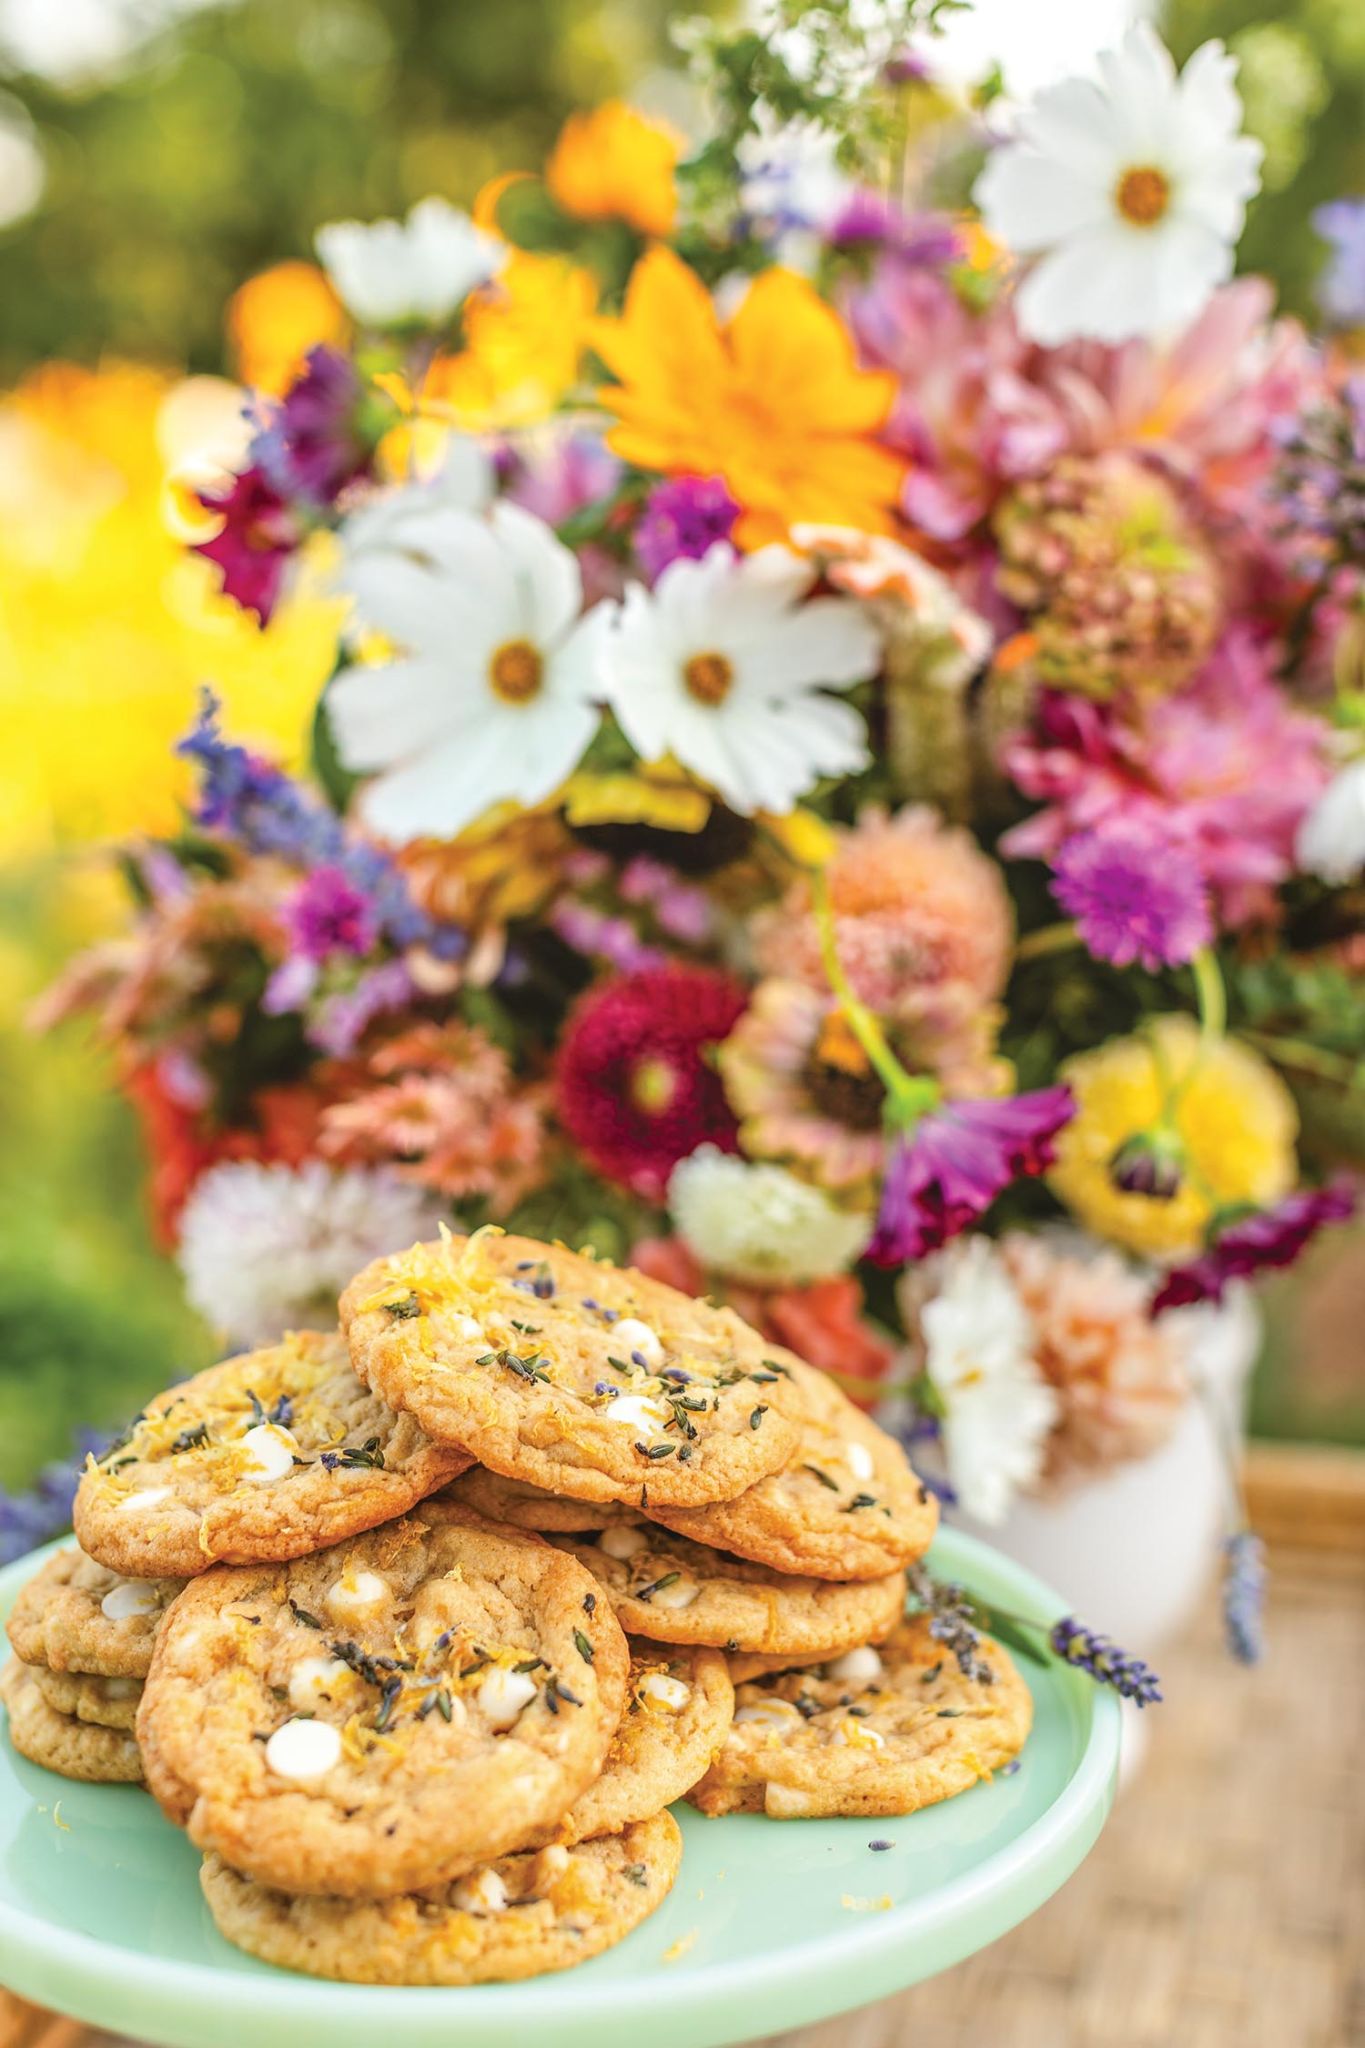 White chocolate chip cookies with lavender sprinkles in front of vase of summer flowers